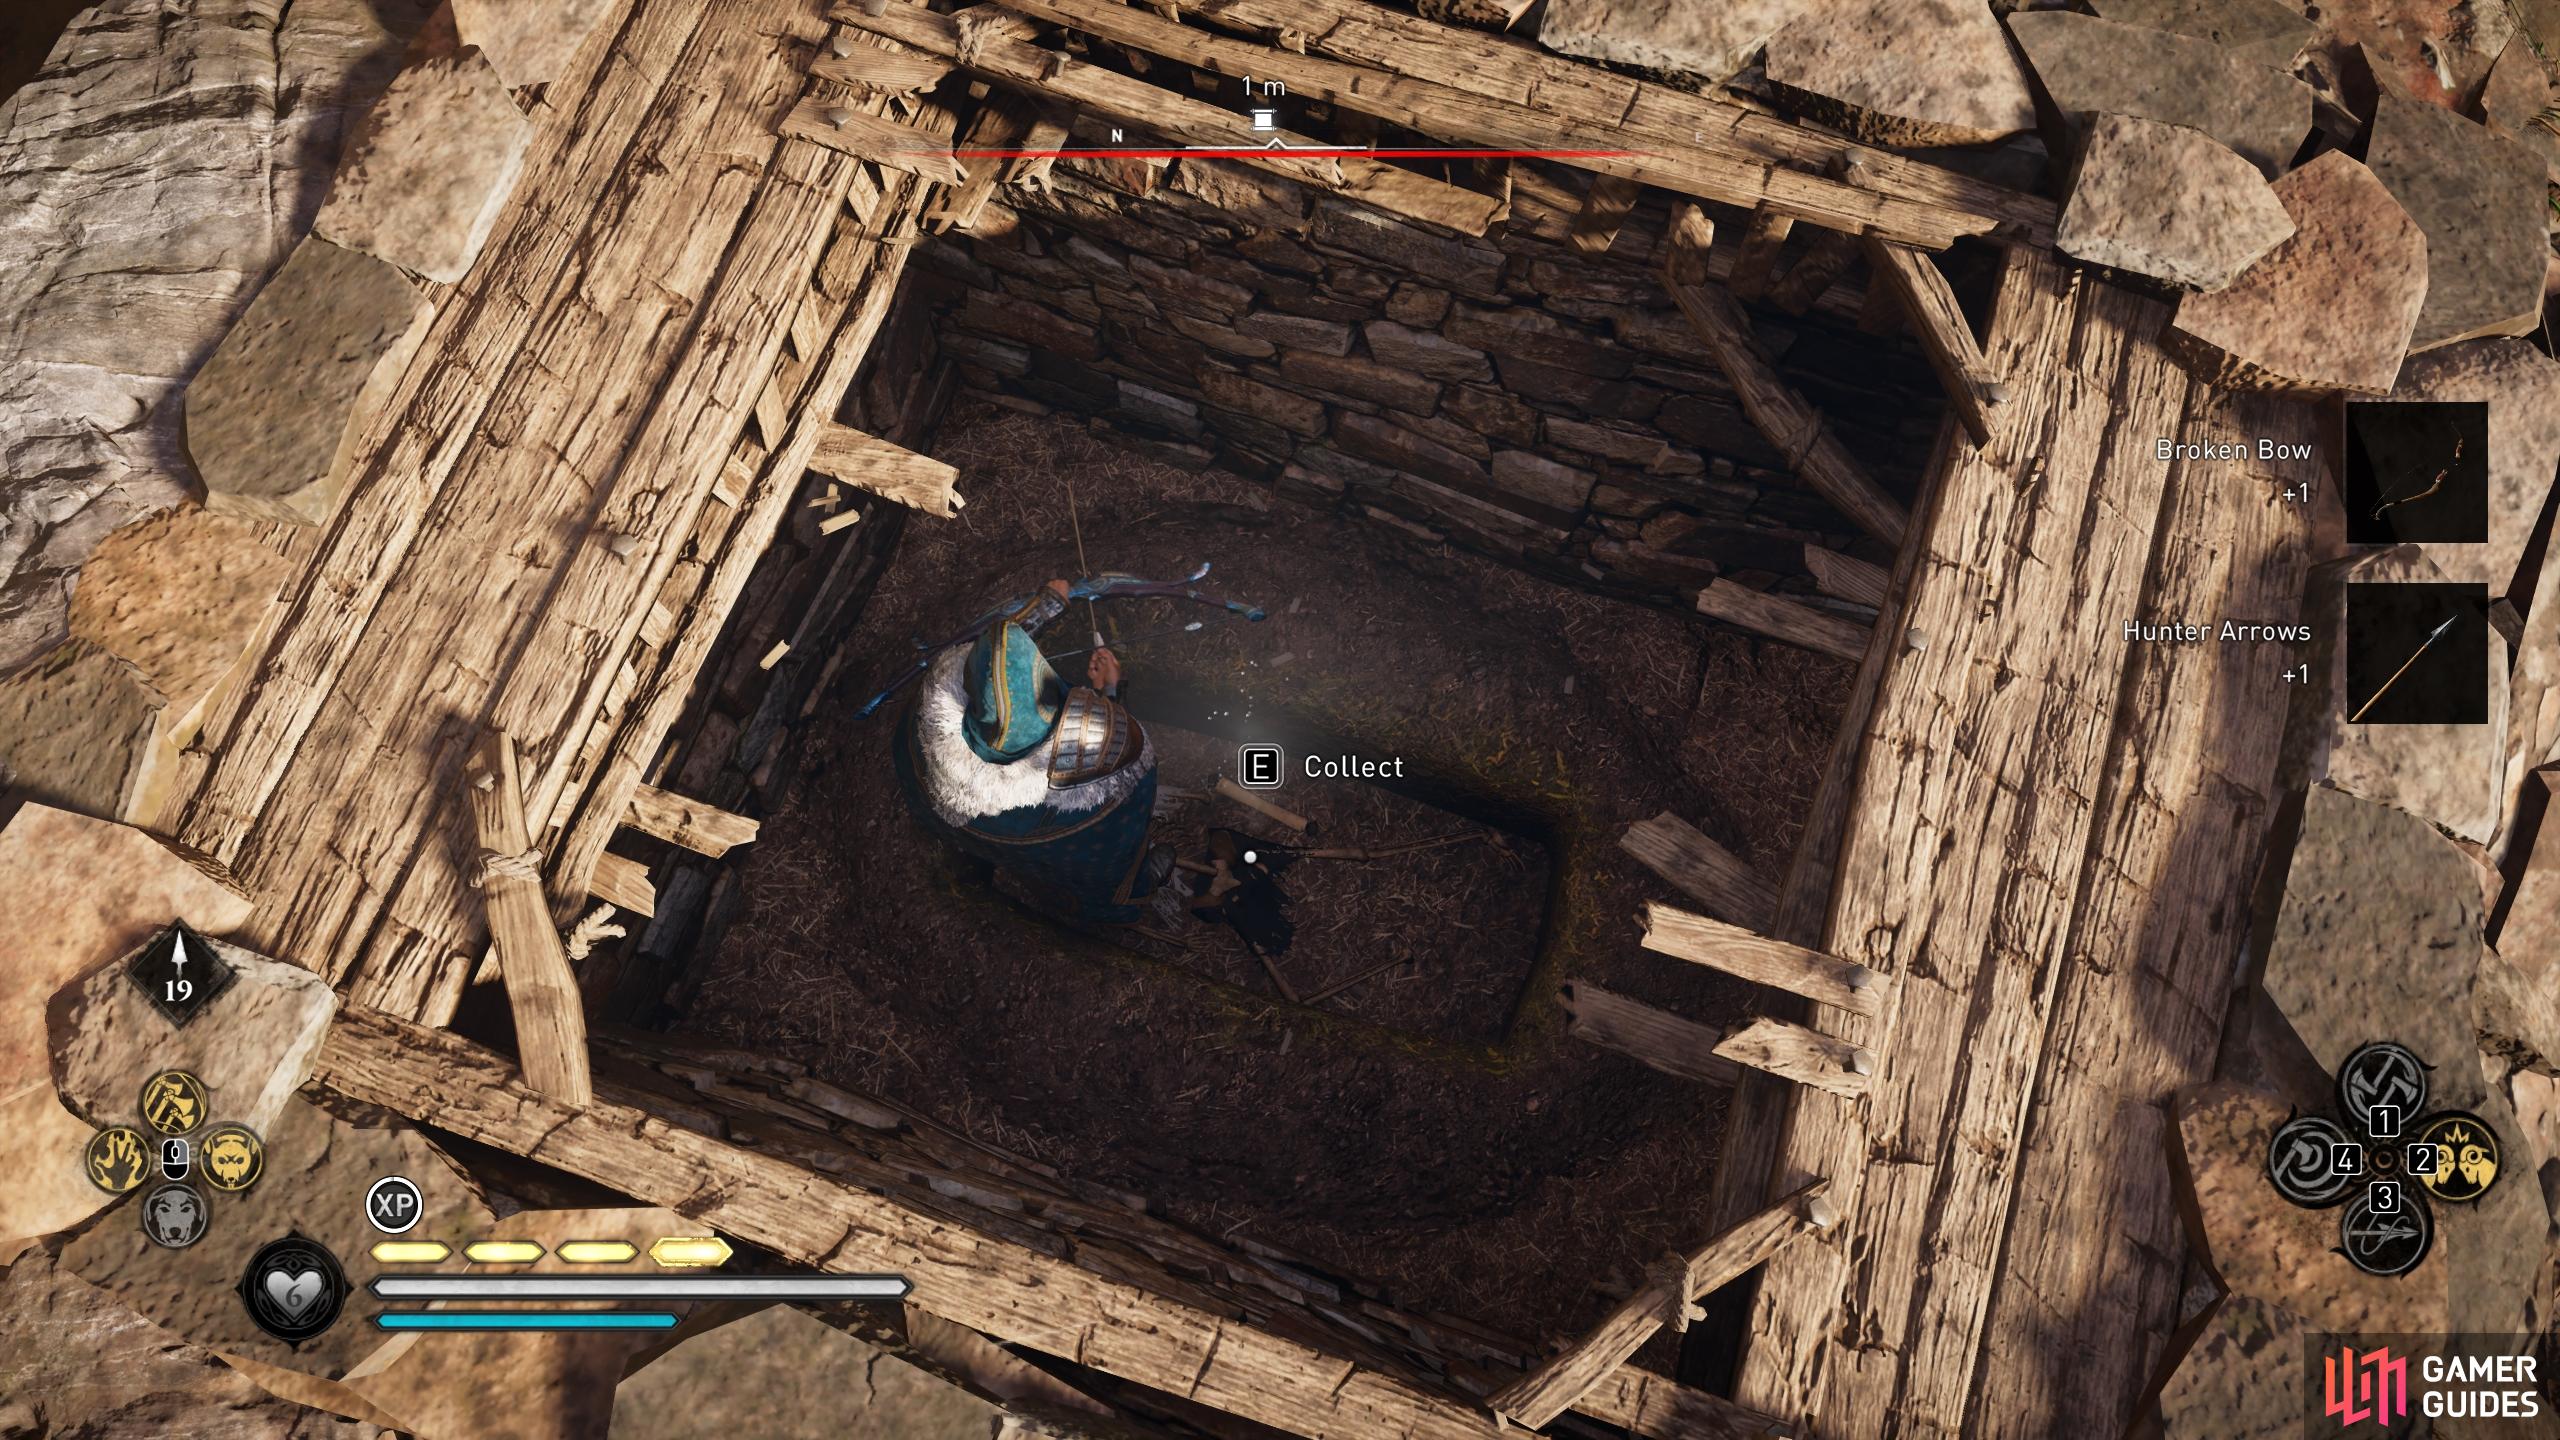 You'll find the Skye Hoard Map in a grave beneath the barricade.